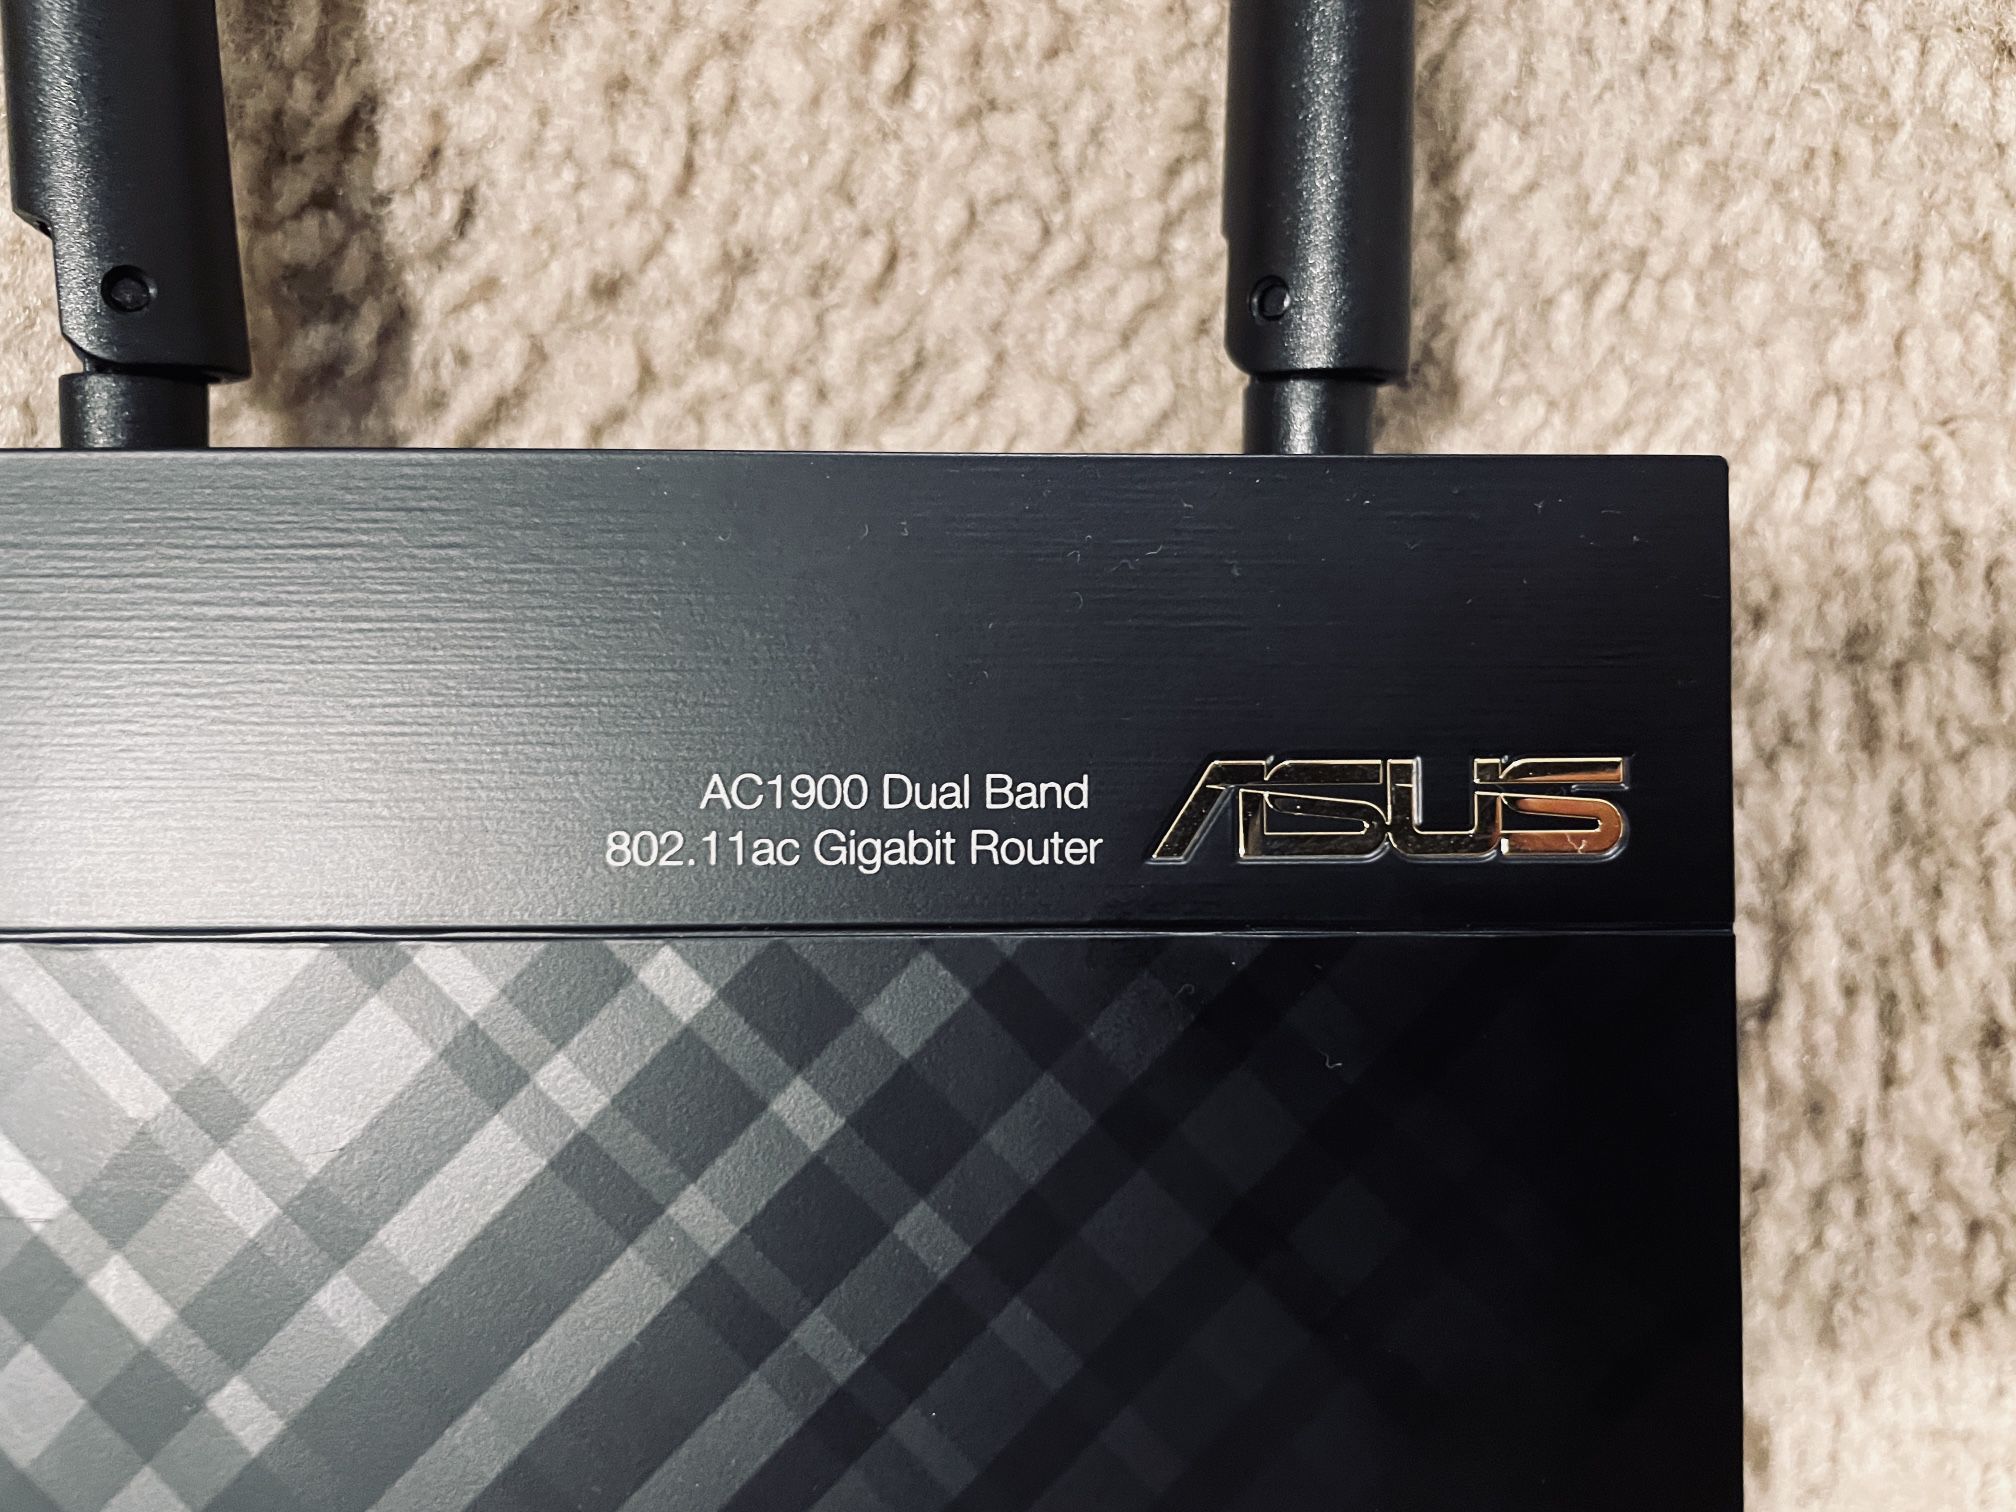 ASUS RT-AC68U Dual Band Router